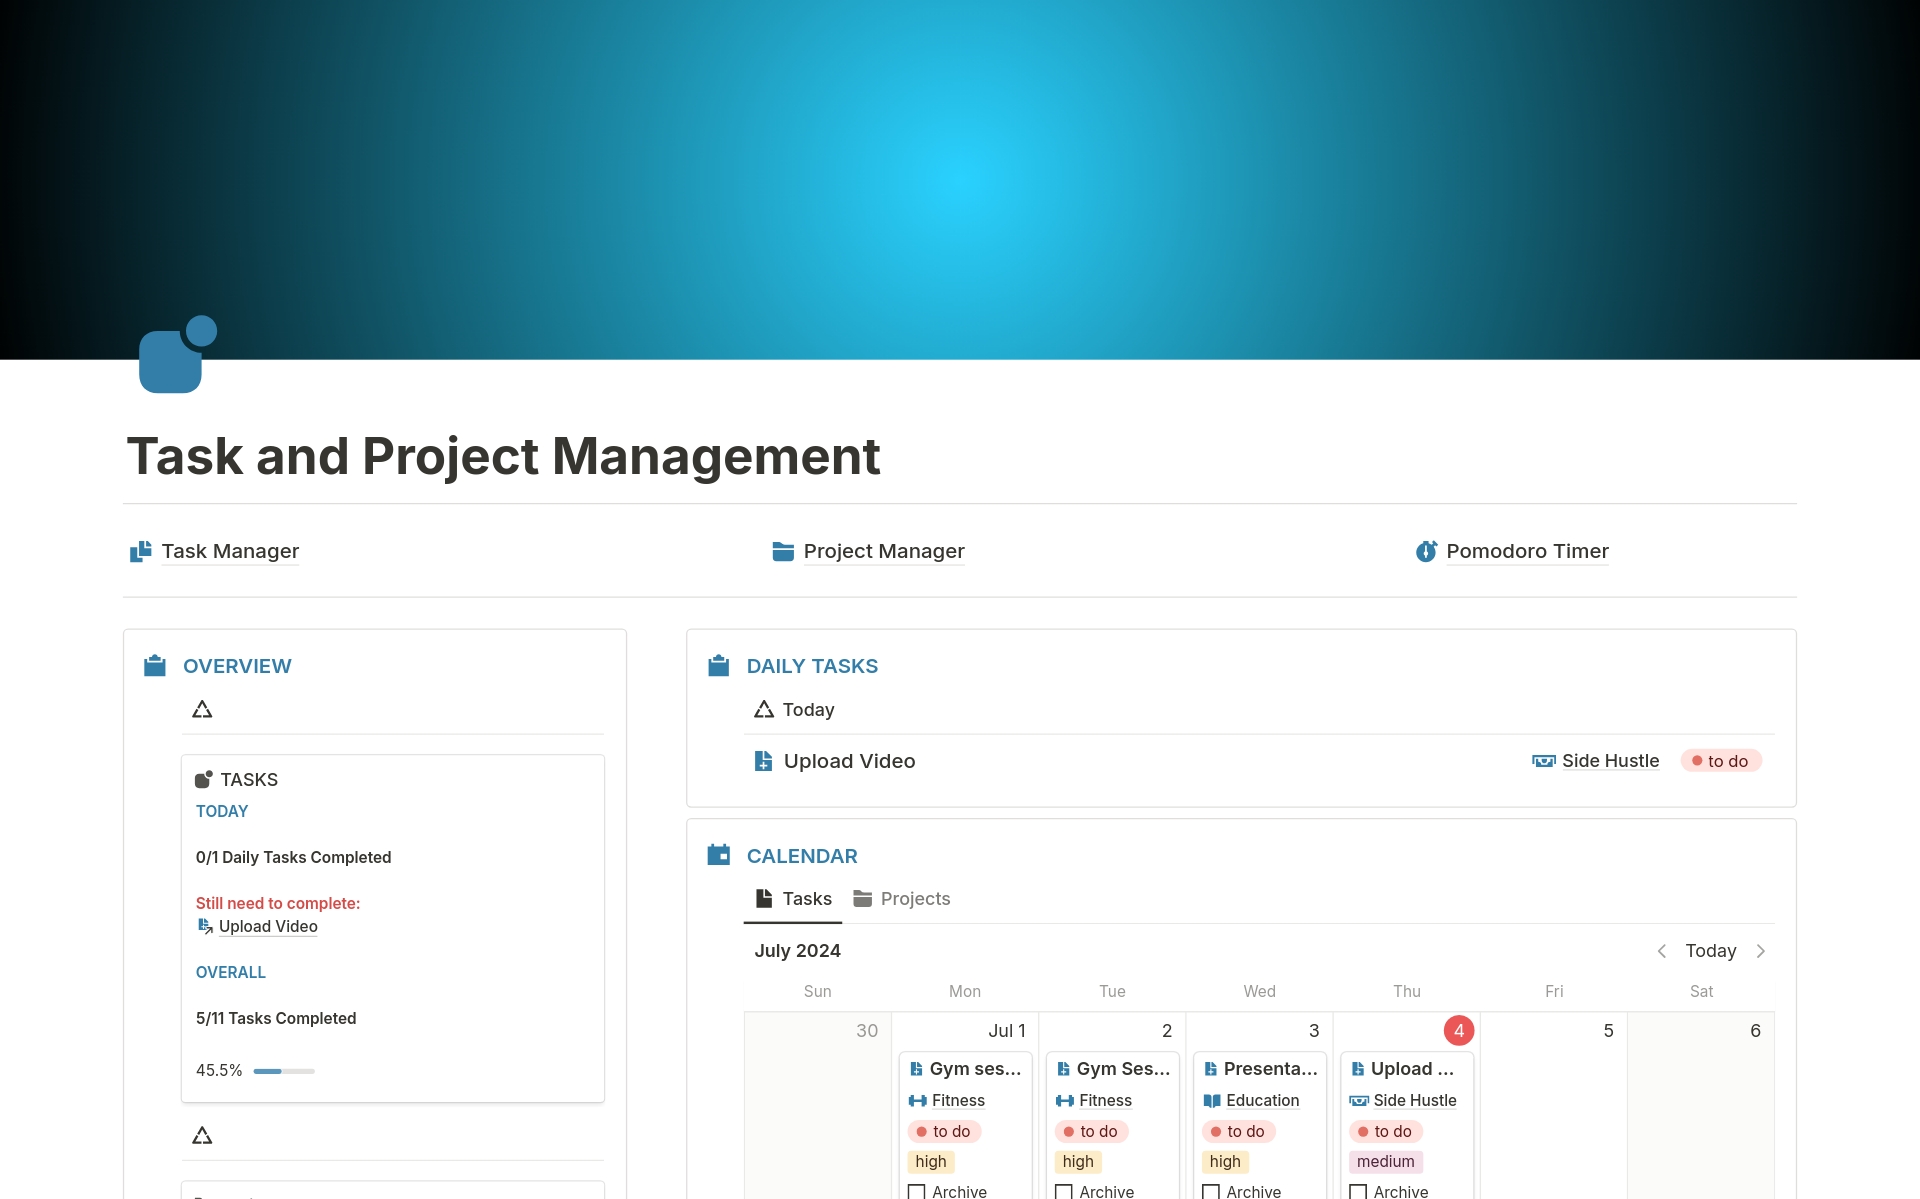 Streamline your workflow and boost productivity with all-in-one task and project management system.